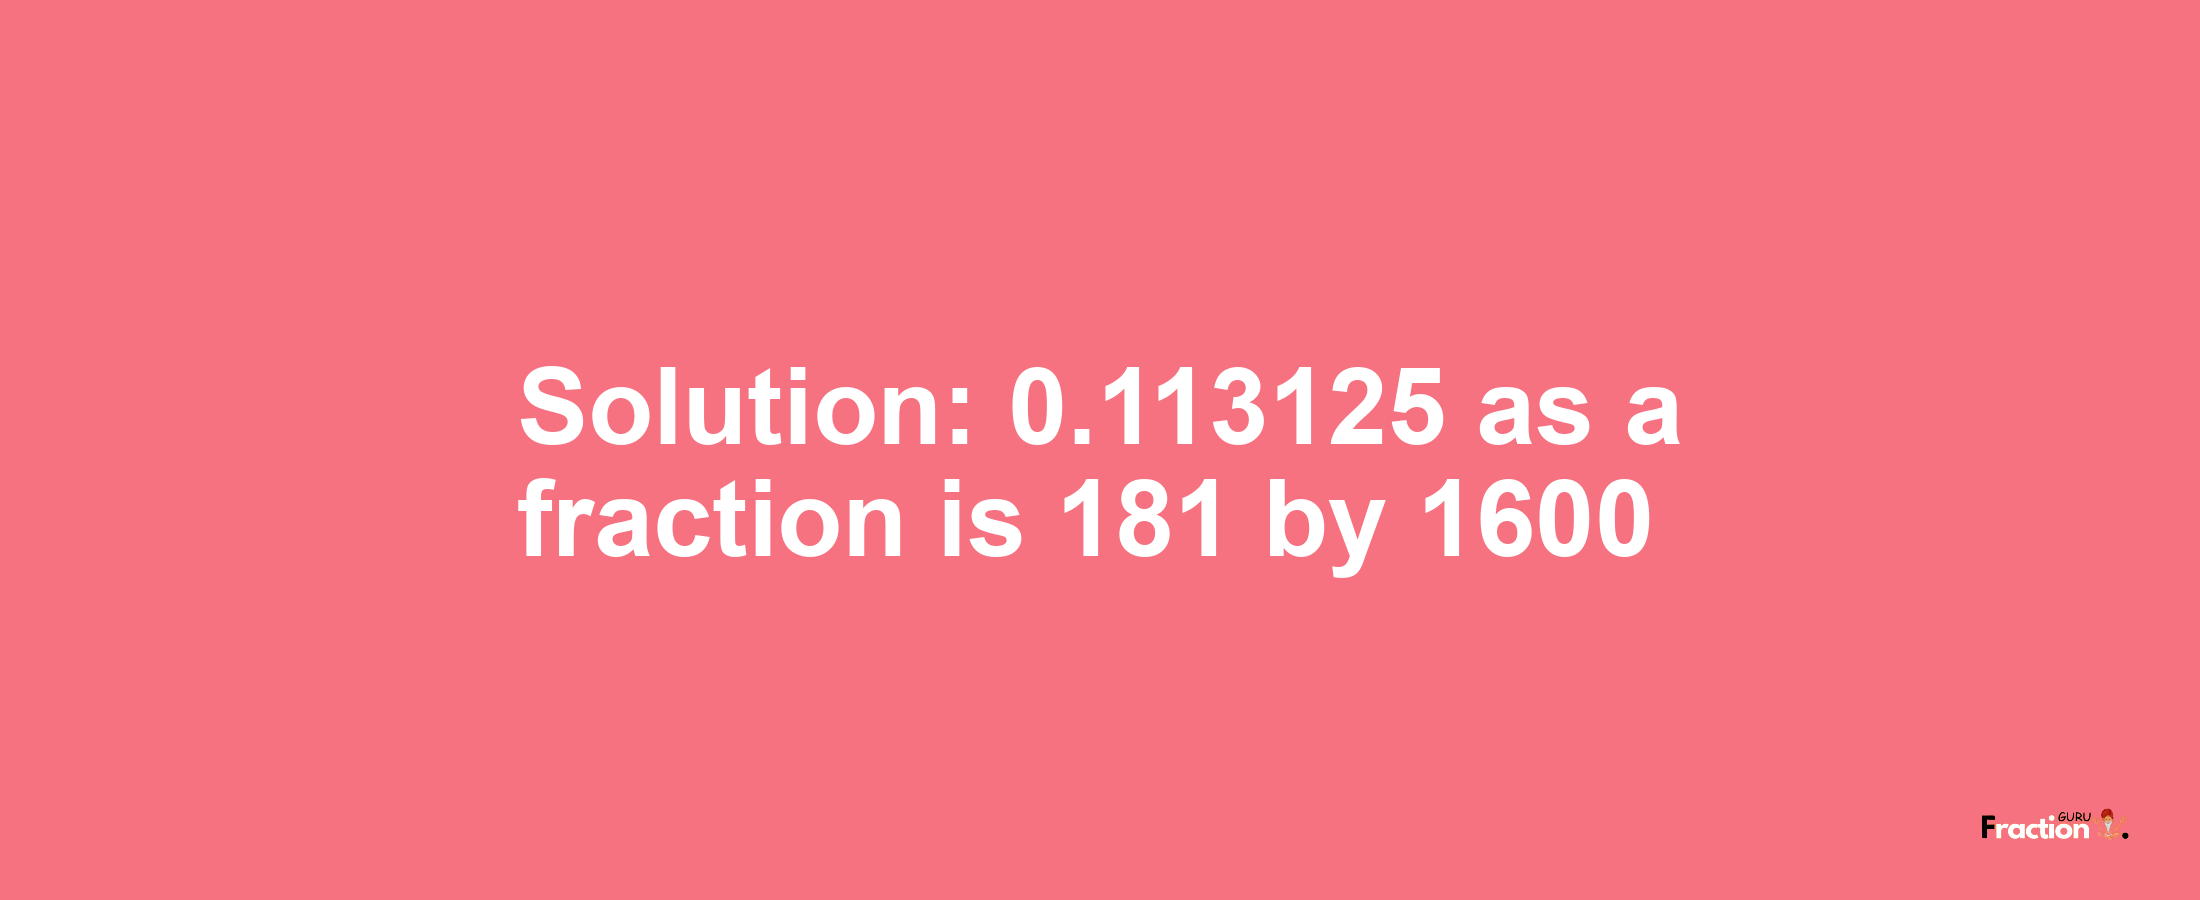 Solution:0.113125 as a fraction is 181/1600